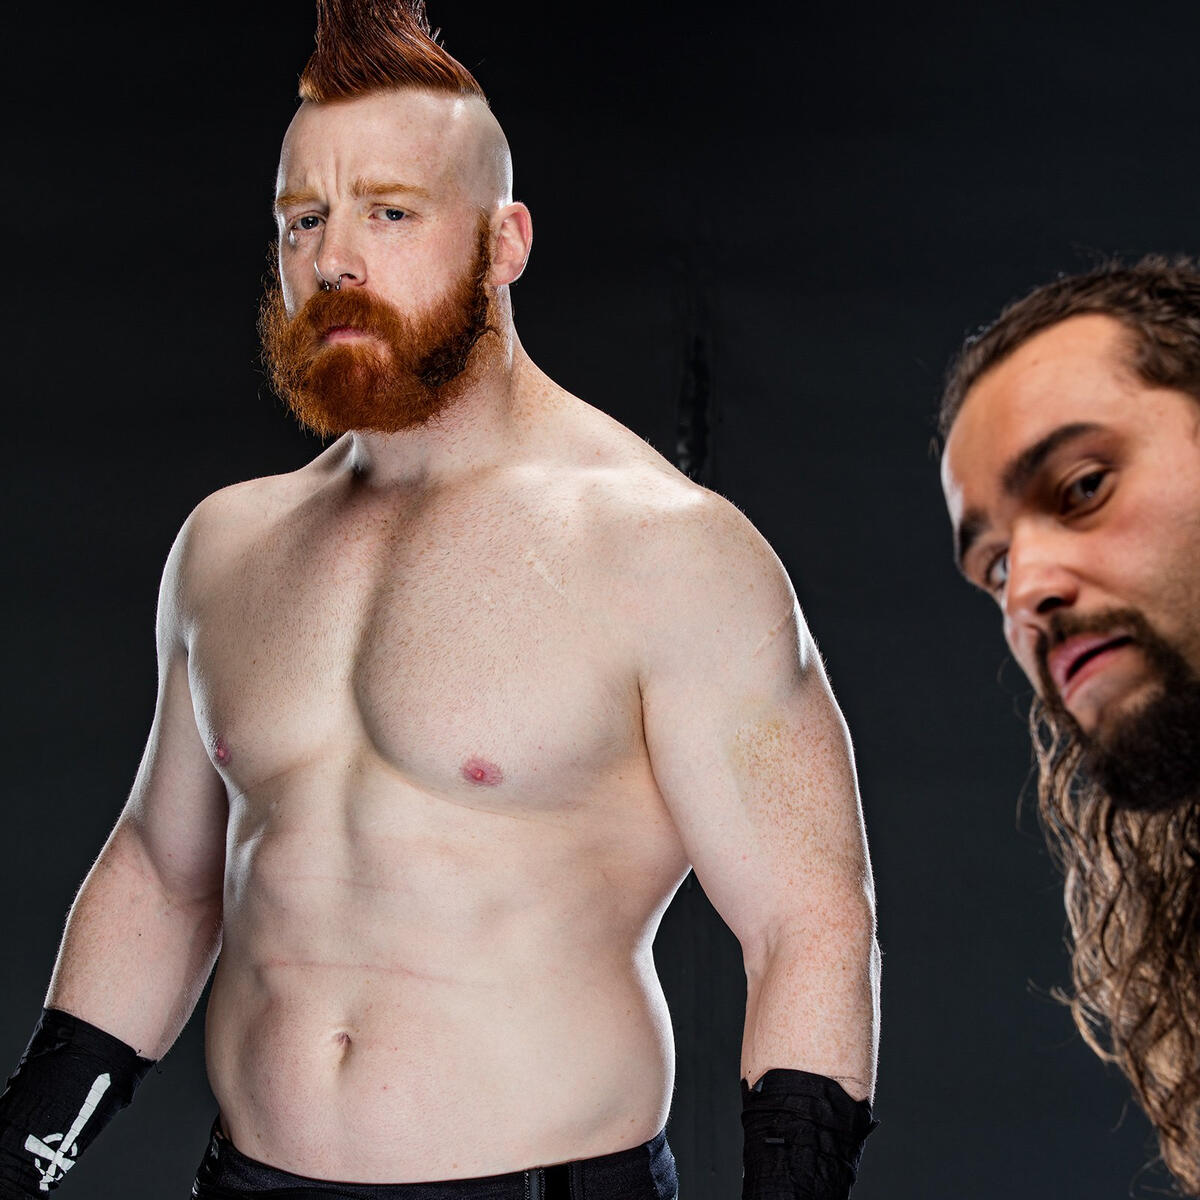 Regarding Sheamus' new look, all Sheamus has to do is dye his beard and  eyebrows black and he'd have a sick Rorschach cosplay. : r/SquaredCircle